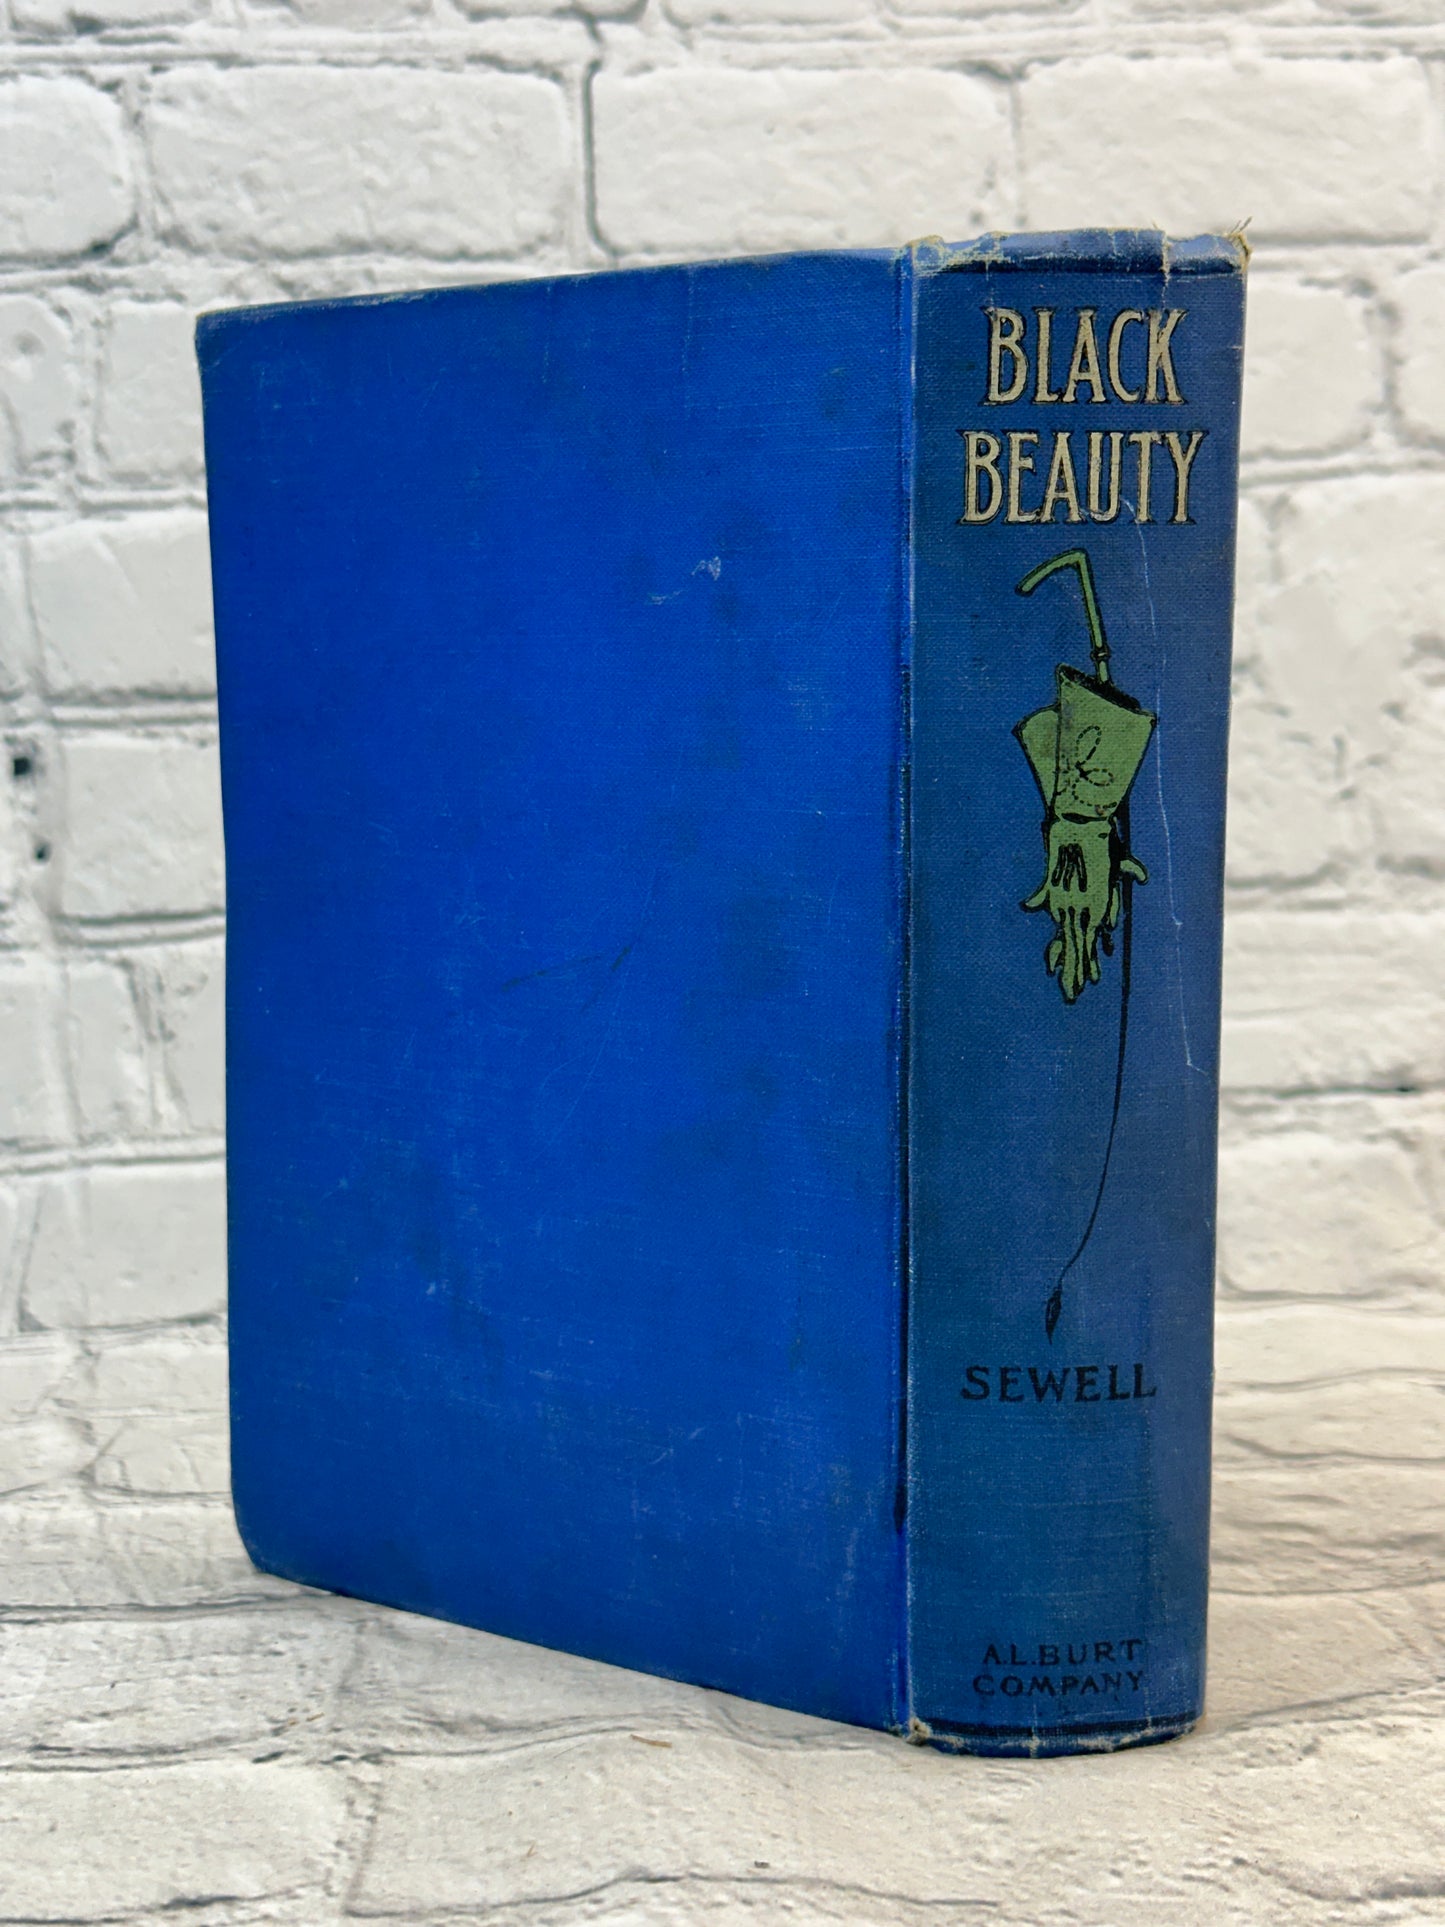 Black Beauty by Anna Sewell [A.L Burt Company · No Stated Date]